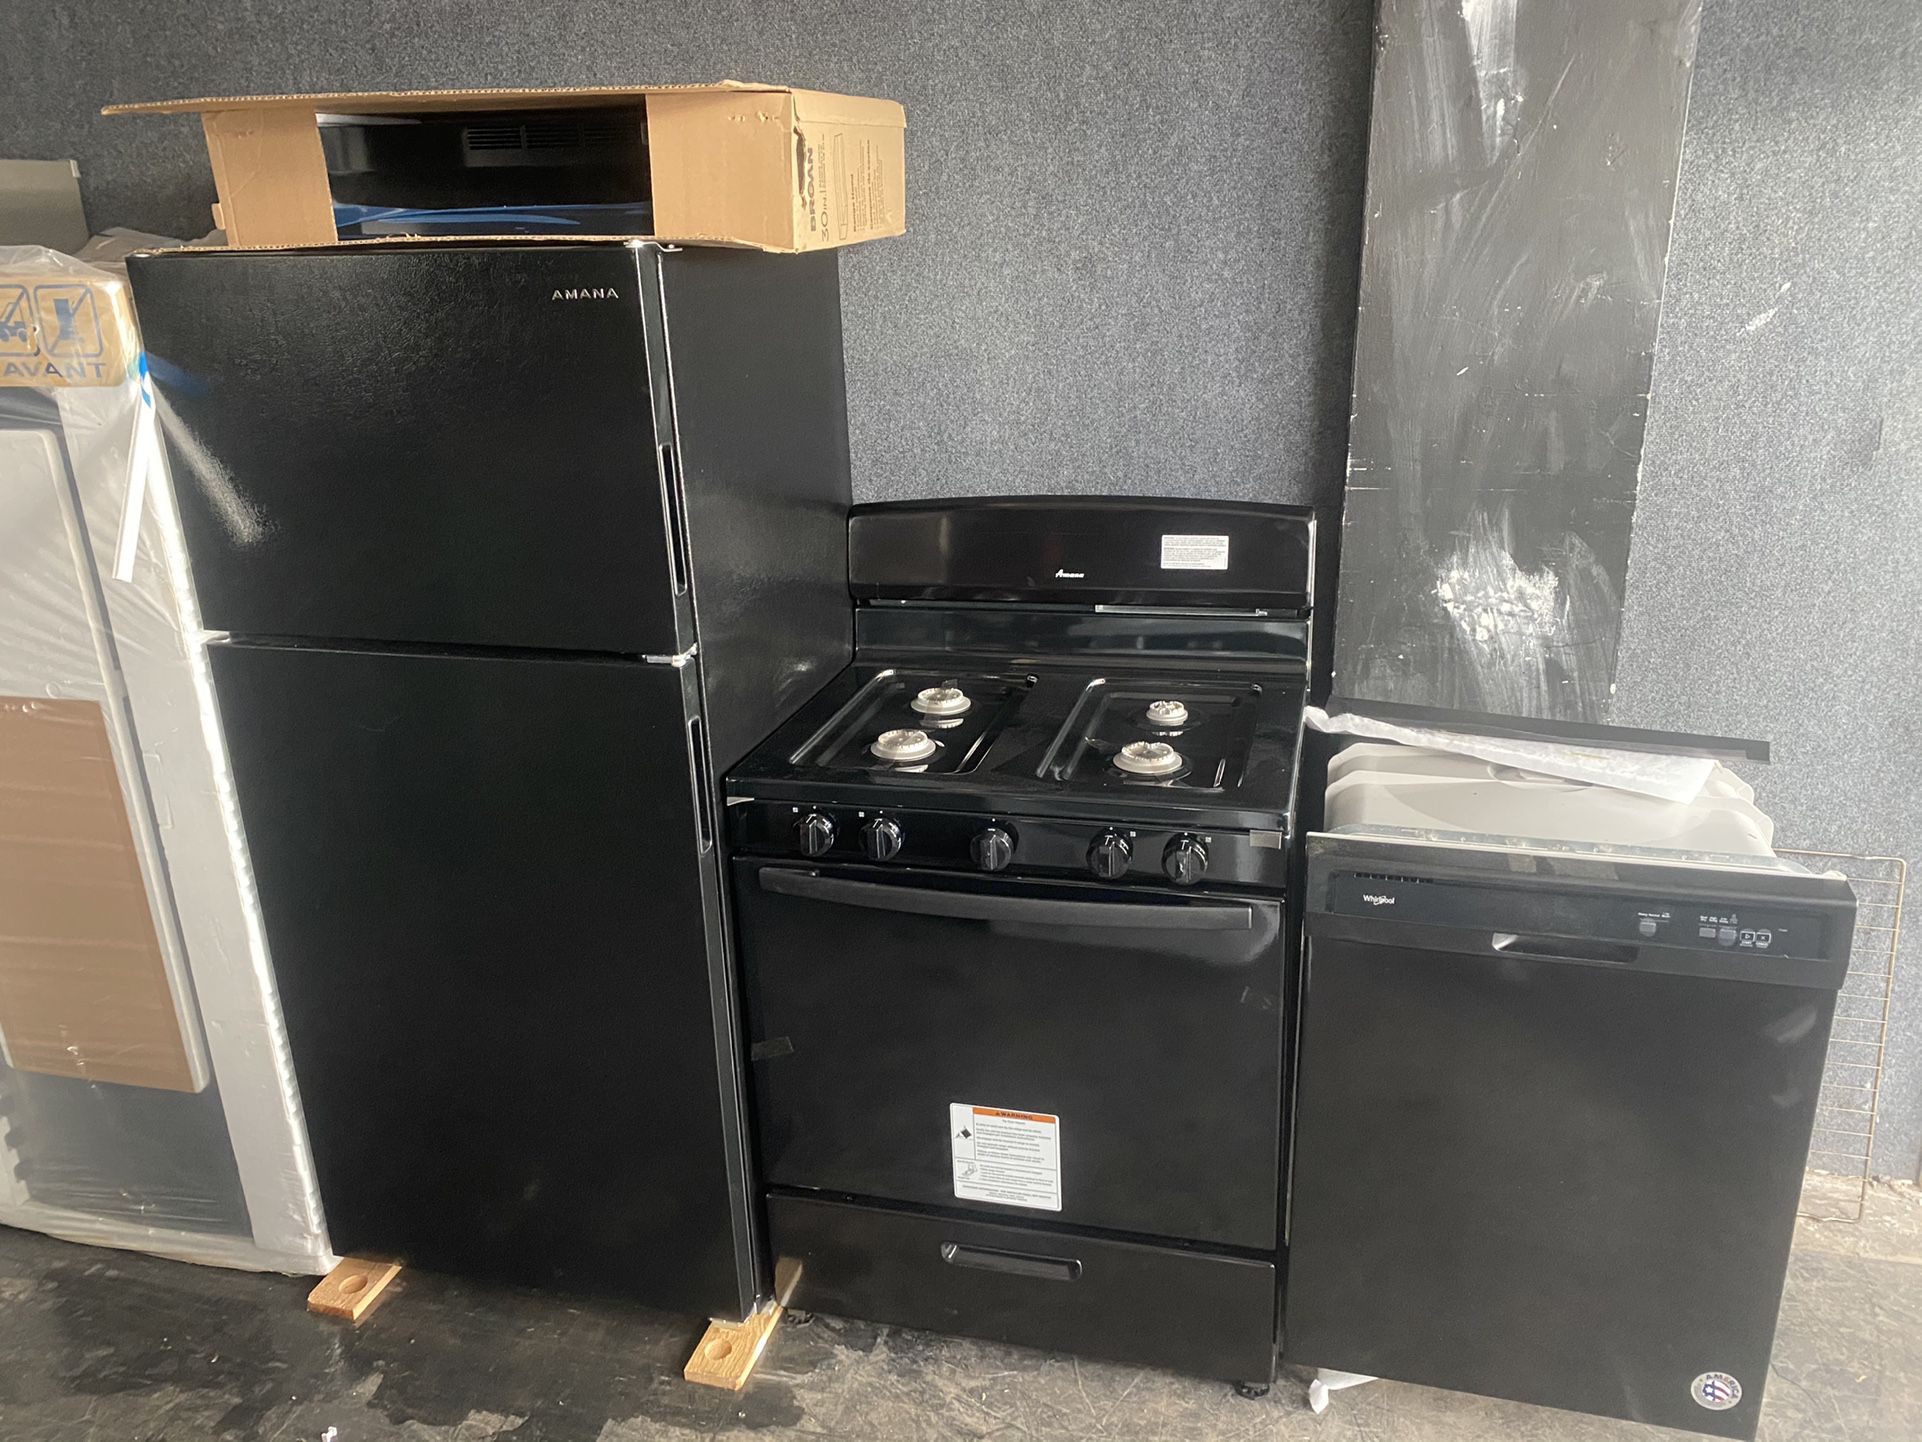 Brand New Never Used 4 Piece Black Amana  Kitchen Appliance Set.$1200 Delivered Installed.$1100 Picked Up.1 Year Manufactures Warranty.